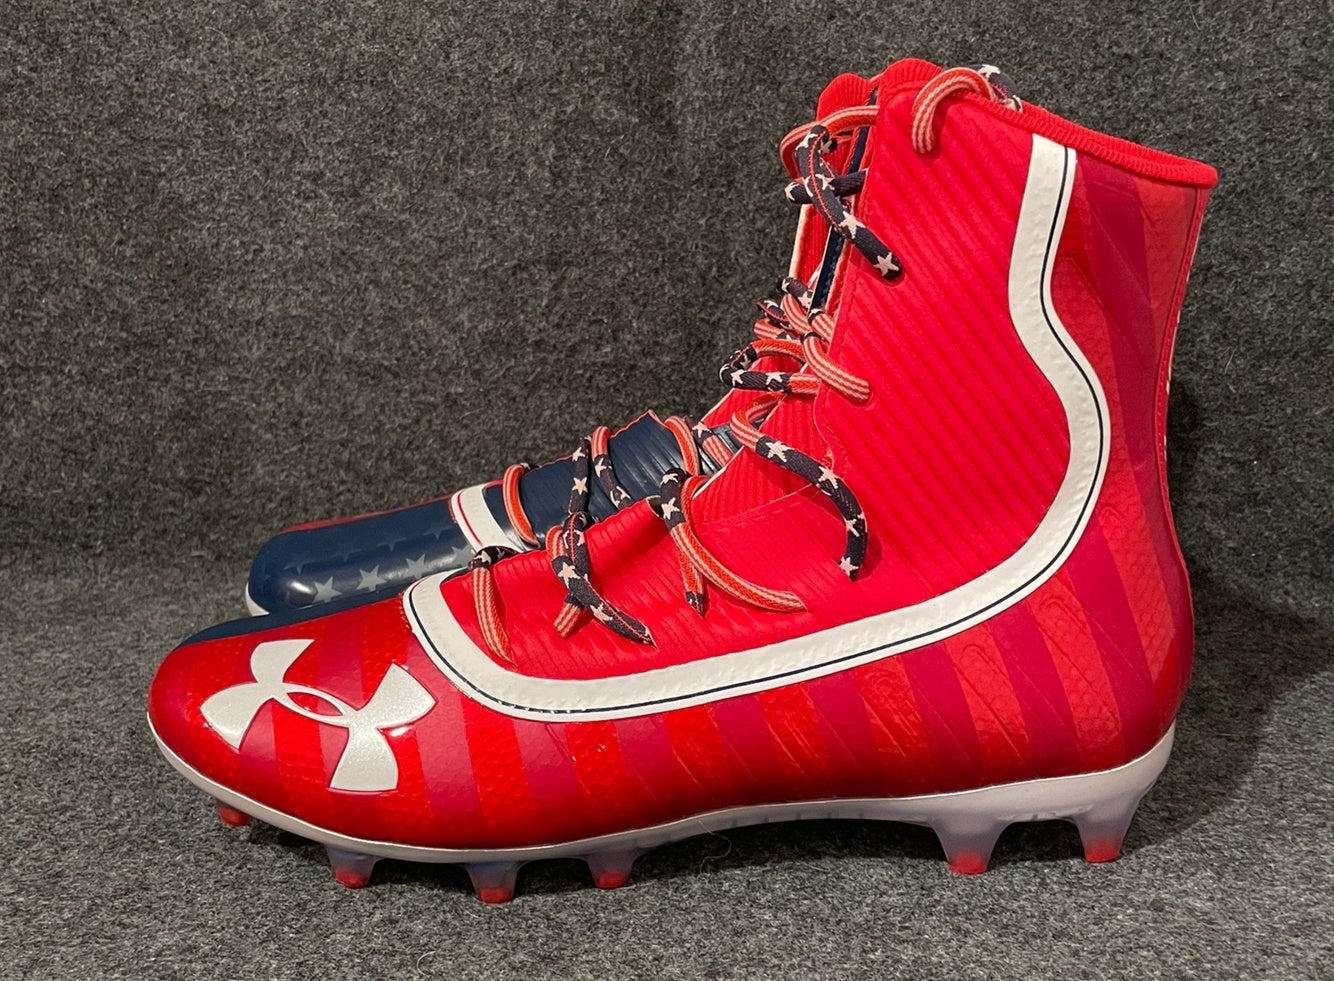 Under Armour Highlight LIMITED EDITION USA Football Cleats 3021191-600 Men 11 14 